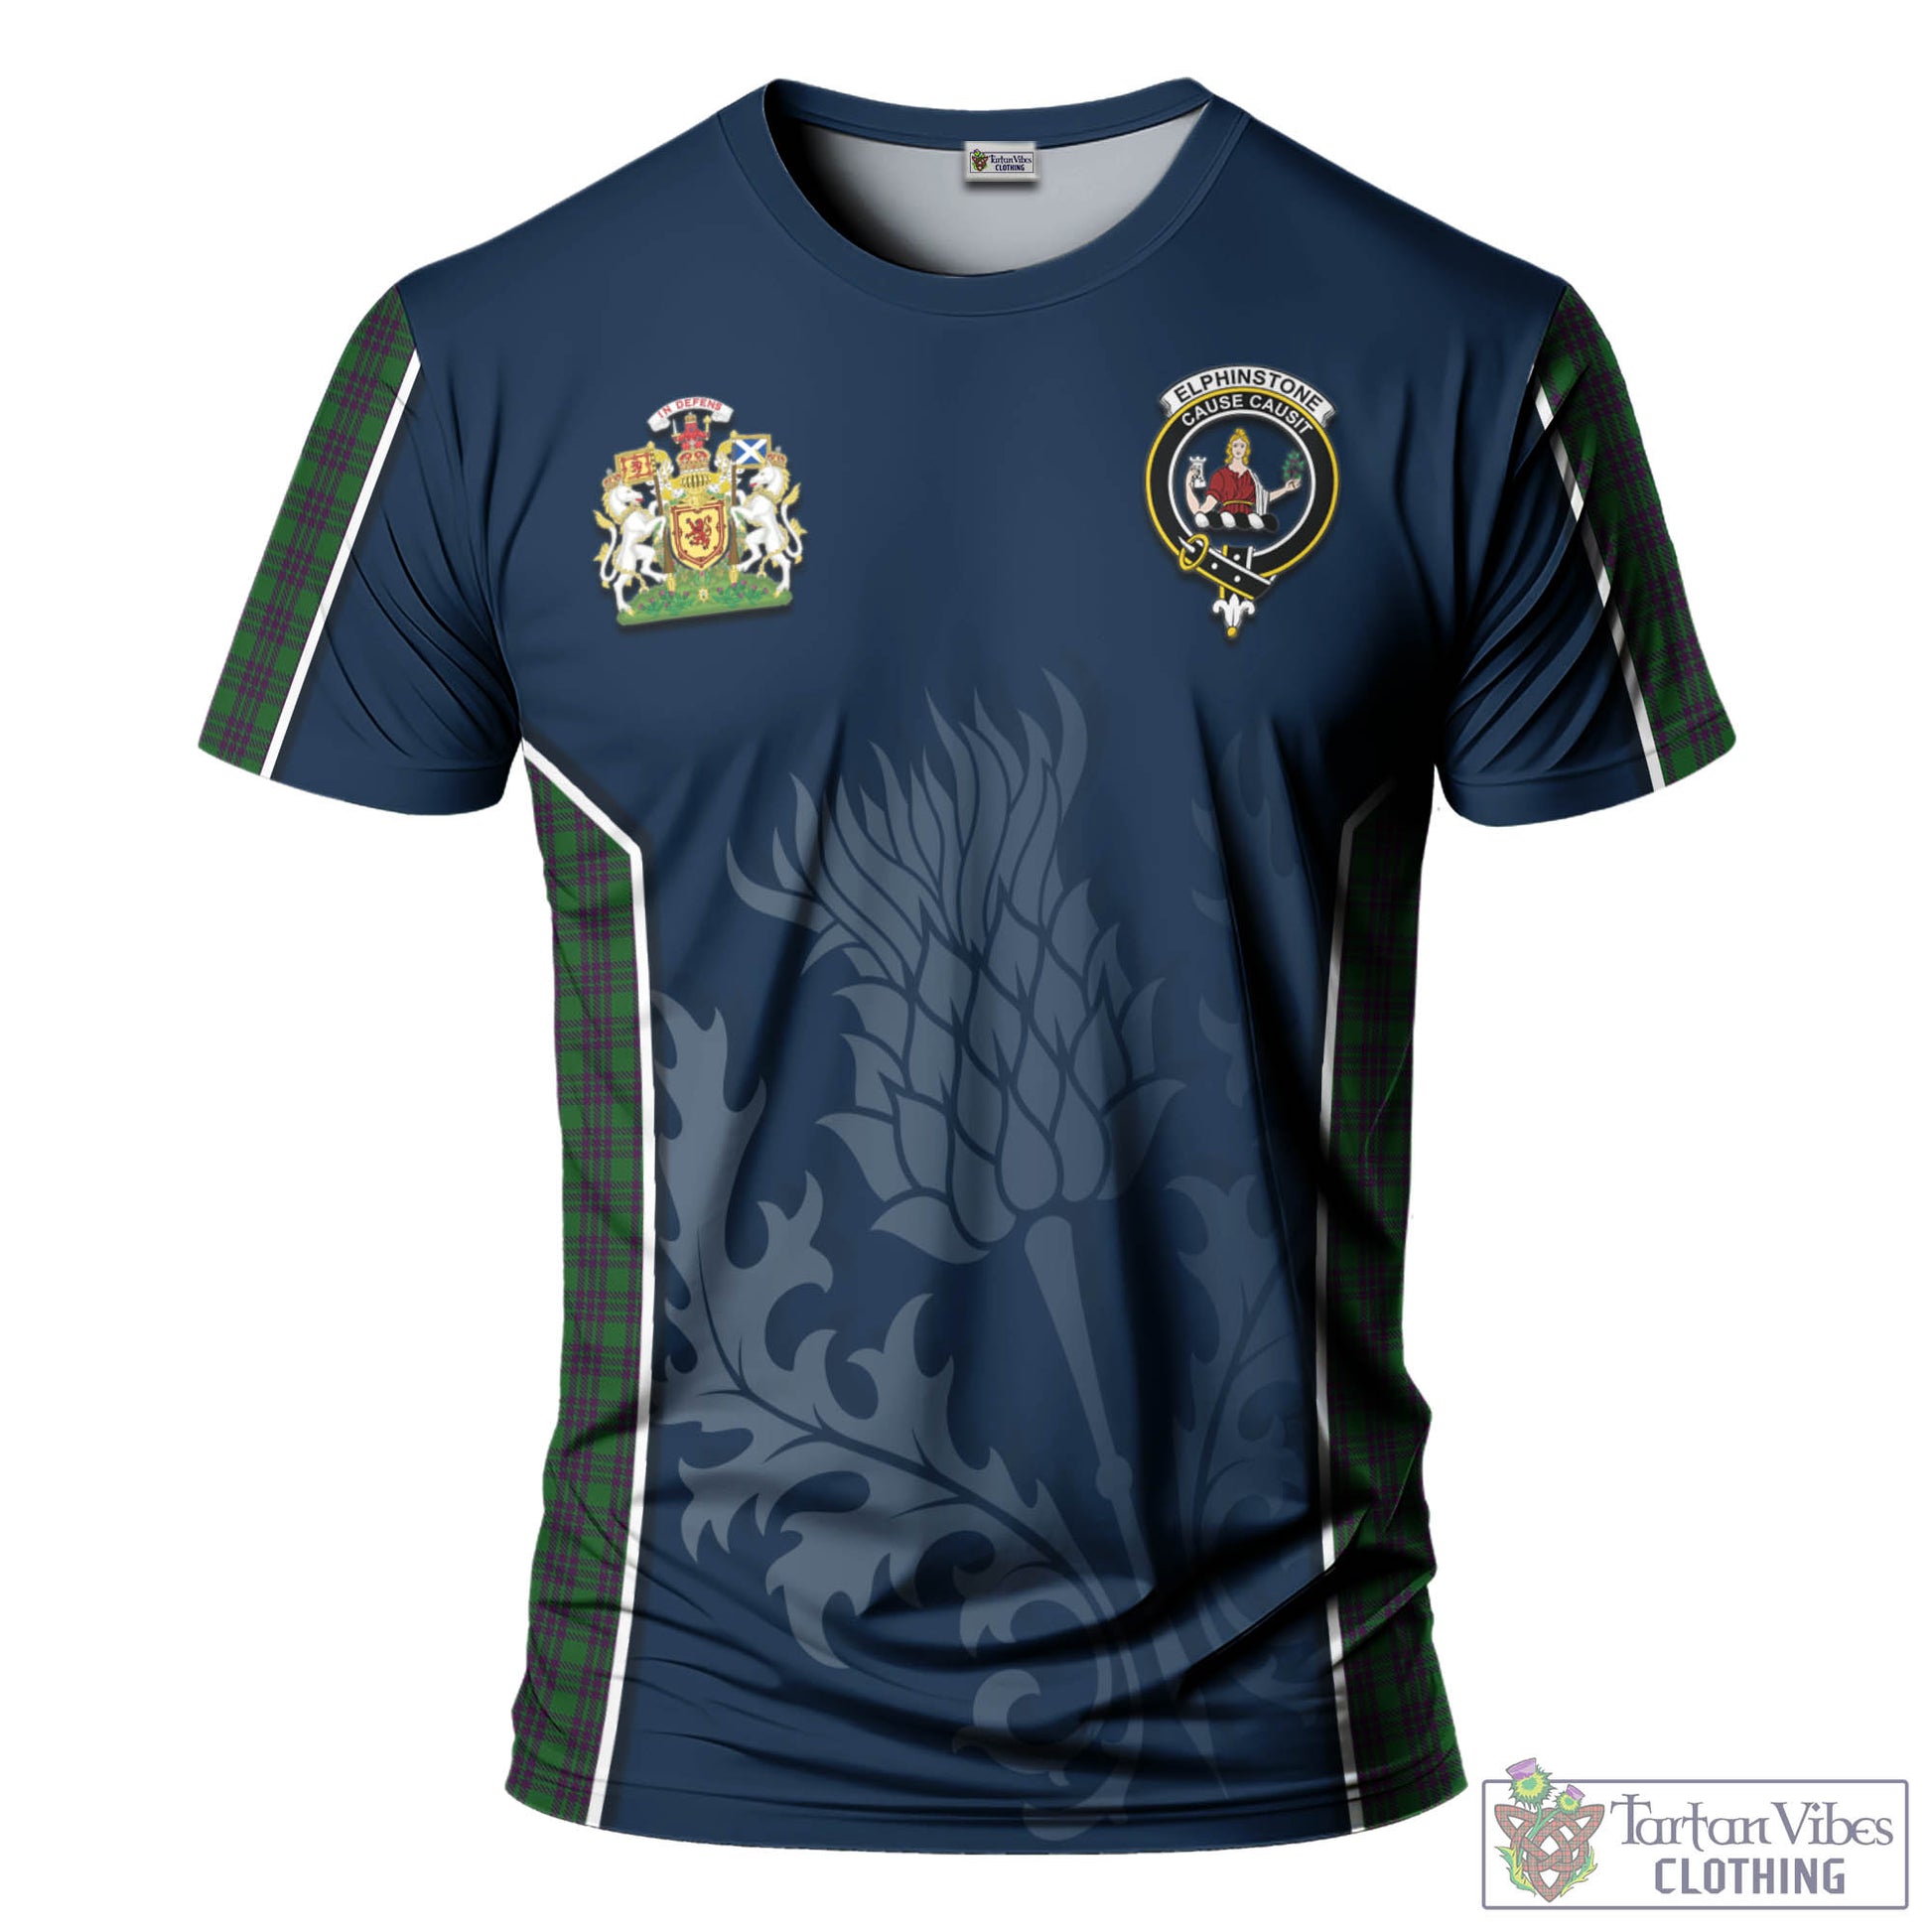 Tartan Vibes Clothing Elphinstone Tartan T-Shirt with Family Crest and Scottish Thistle Vibes Sport Style